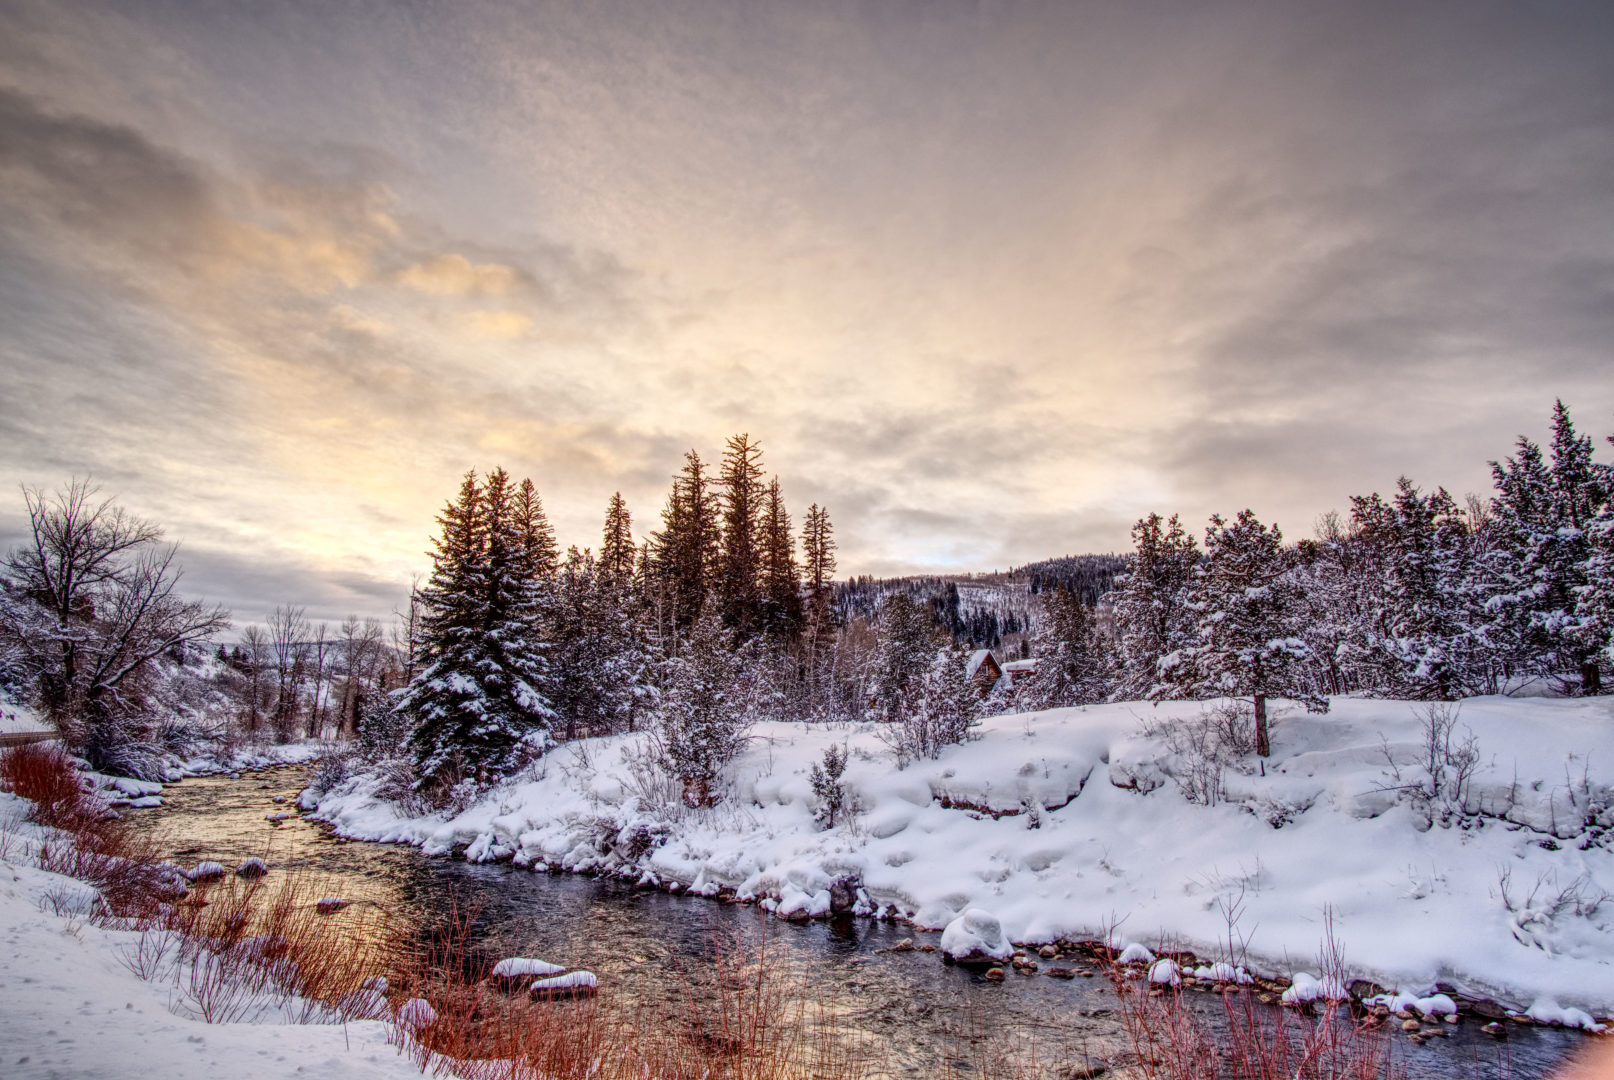 A snowy morning on the banks of the Provo River in Kamas, Utah on the way to the Wolf Creek Pass